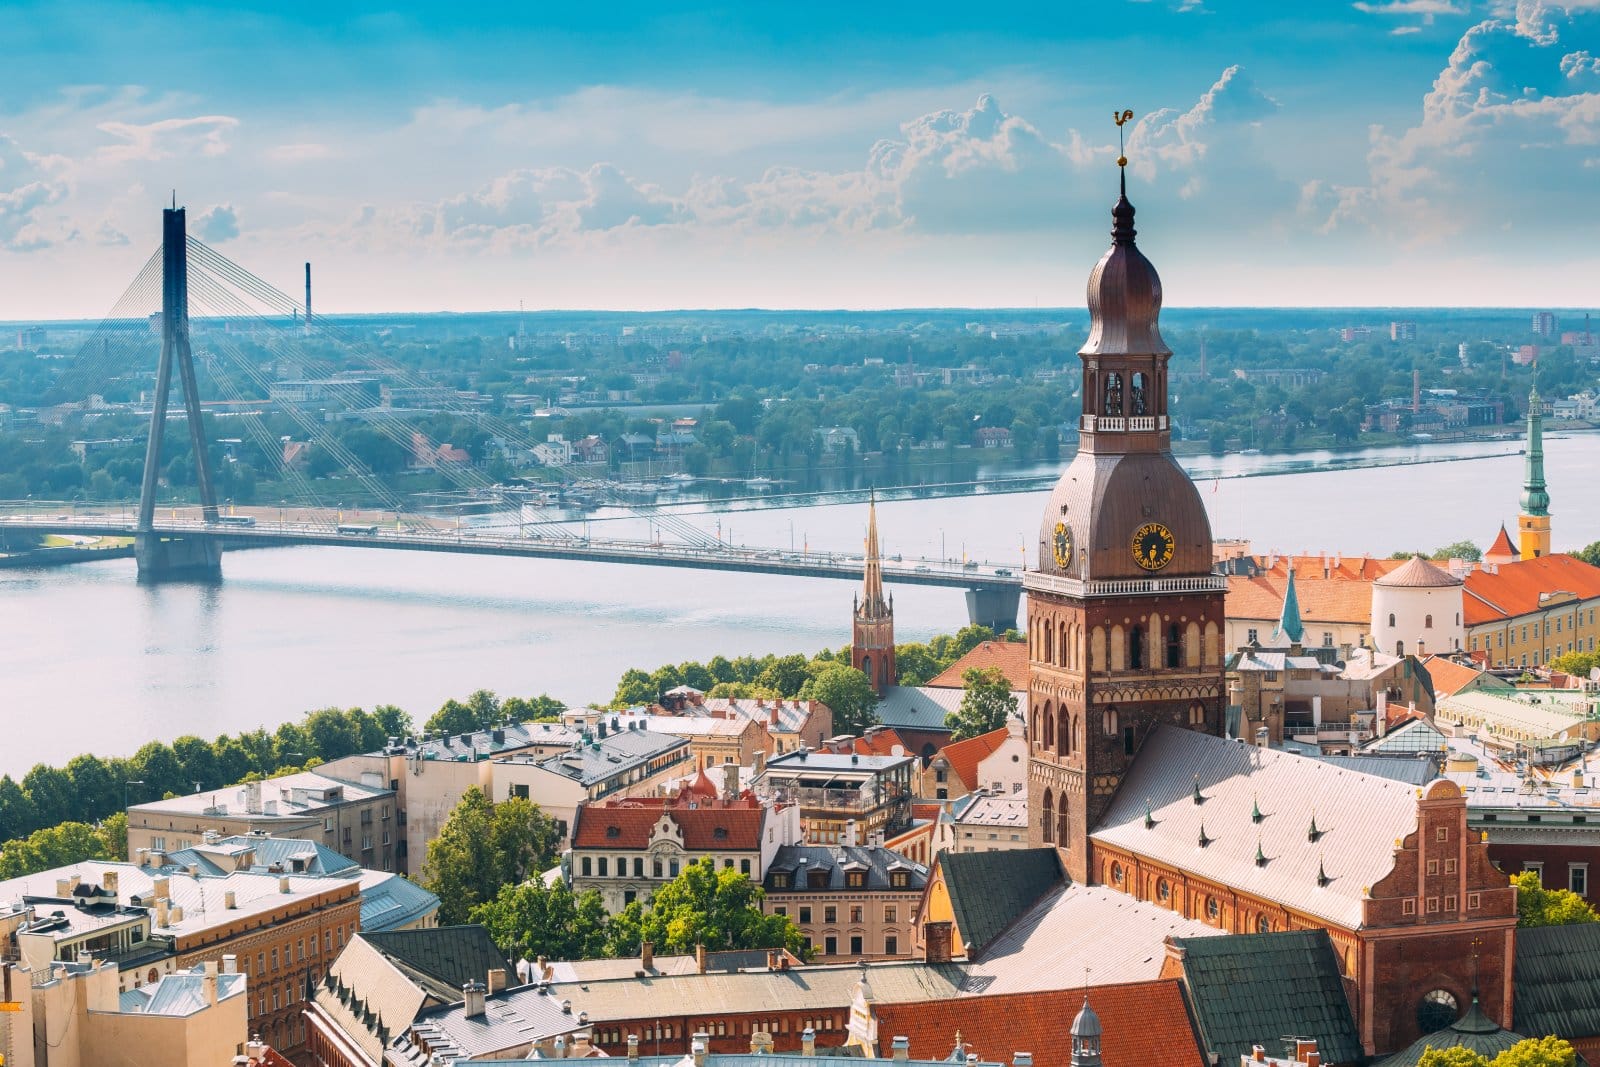 <p class="wp-caption-text">Image Credit: Shutterstock / George Trumpeter</p>  <p>Riga, with its Art Nouveau architecture and historic Old Town, offers an inexpensive yet rich travel experience.</p>